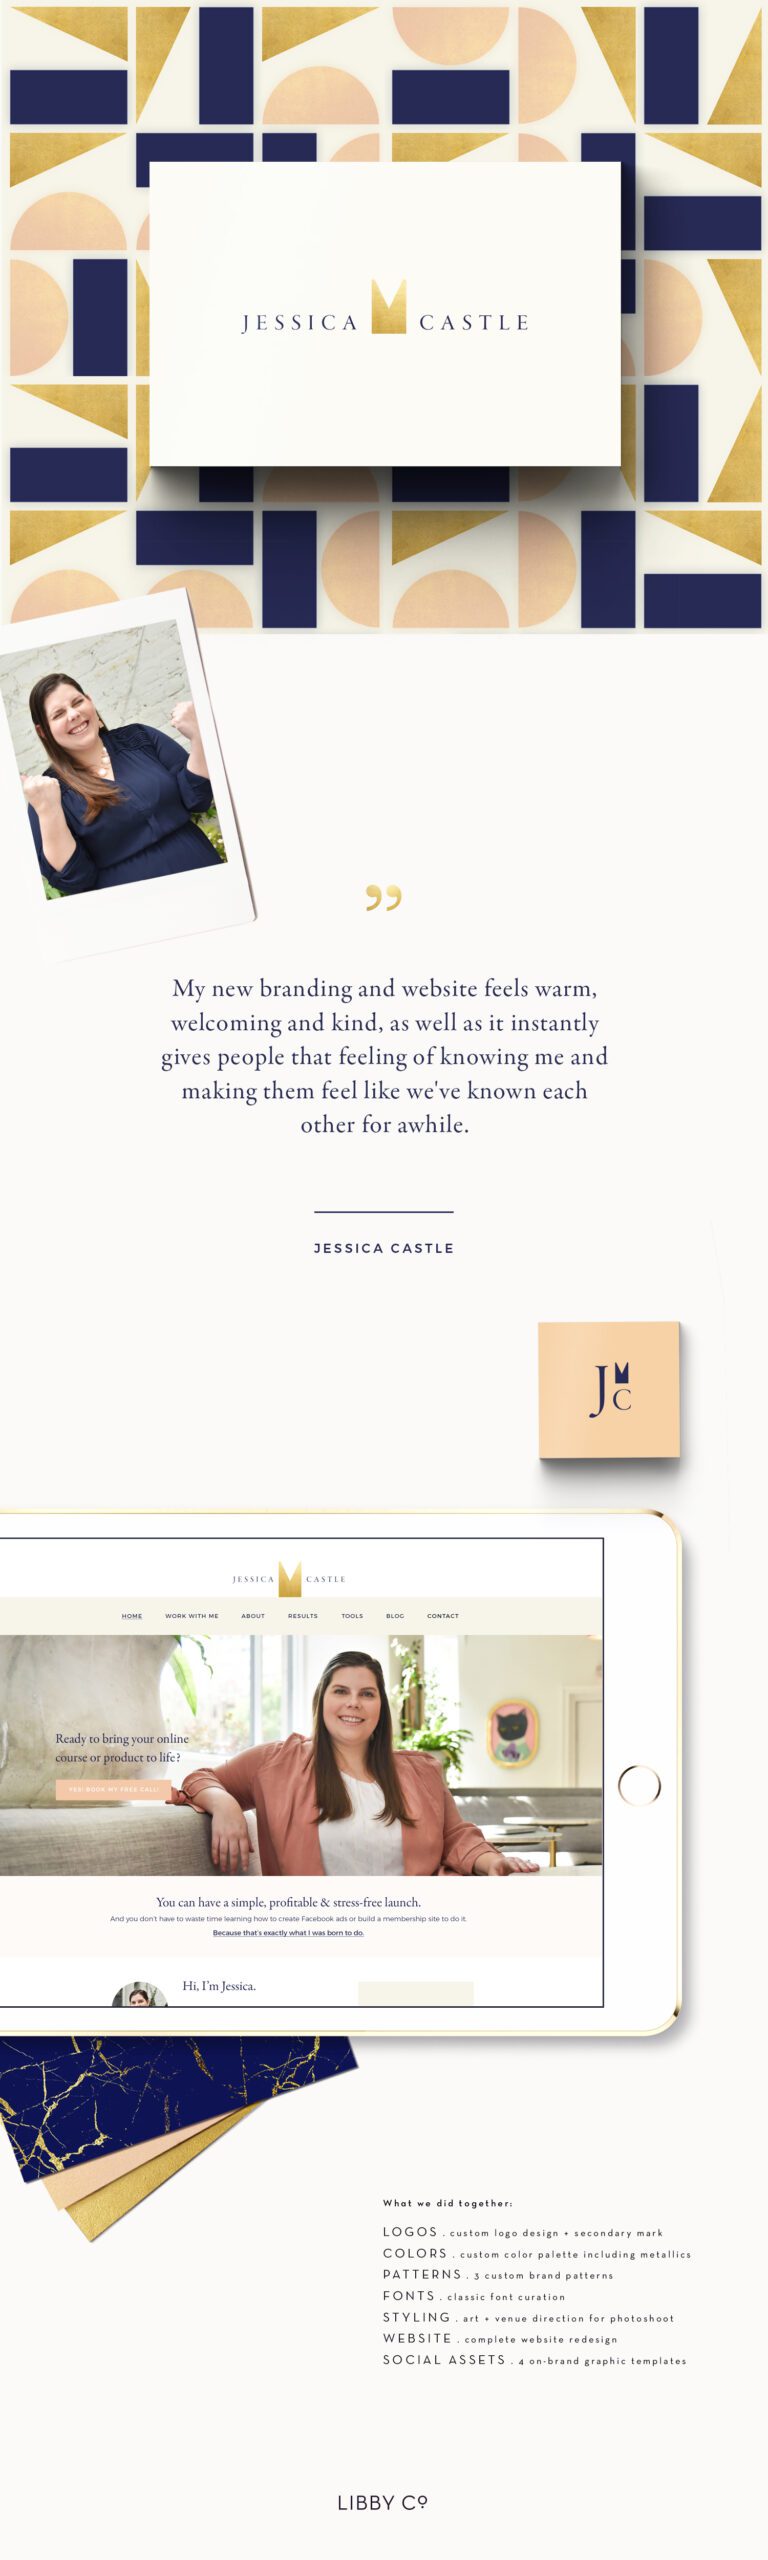 Stylish branding makeover for Jessica M. Castle. See more >>